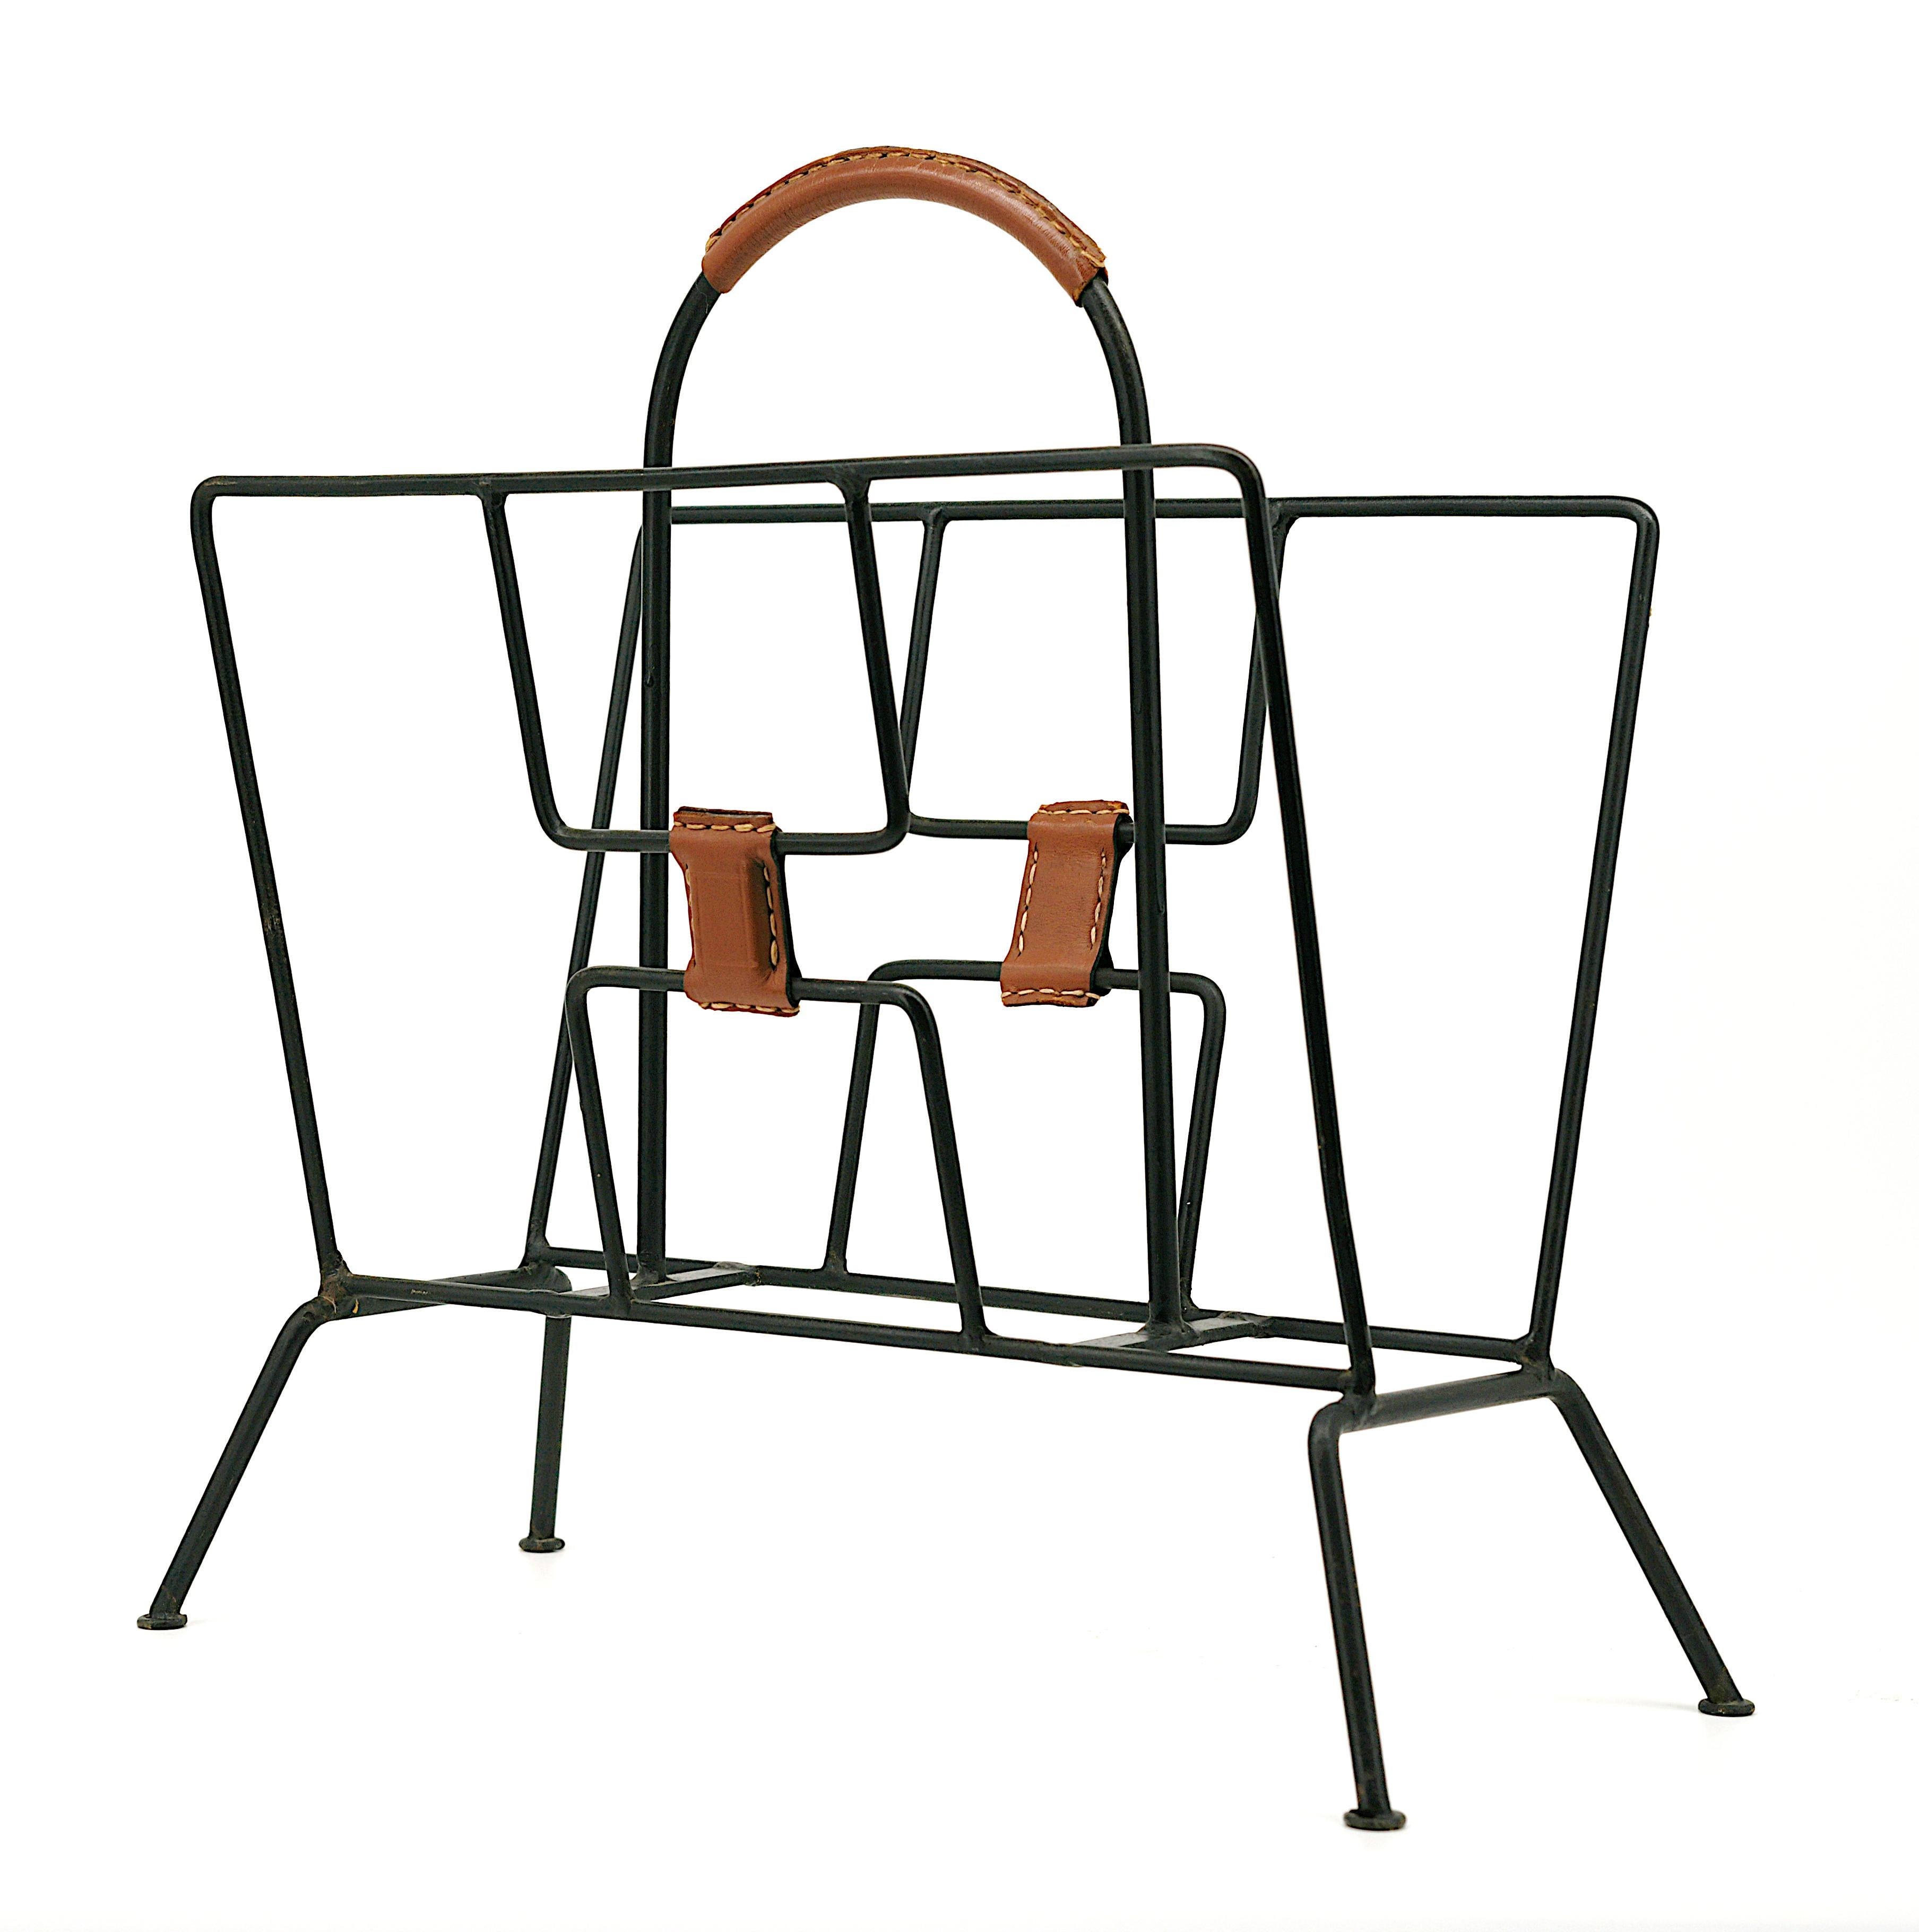 Leather Jacques ADNET French Mid-century Magazine Rack, 1950s For Sale